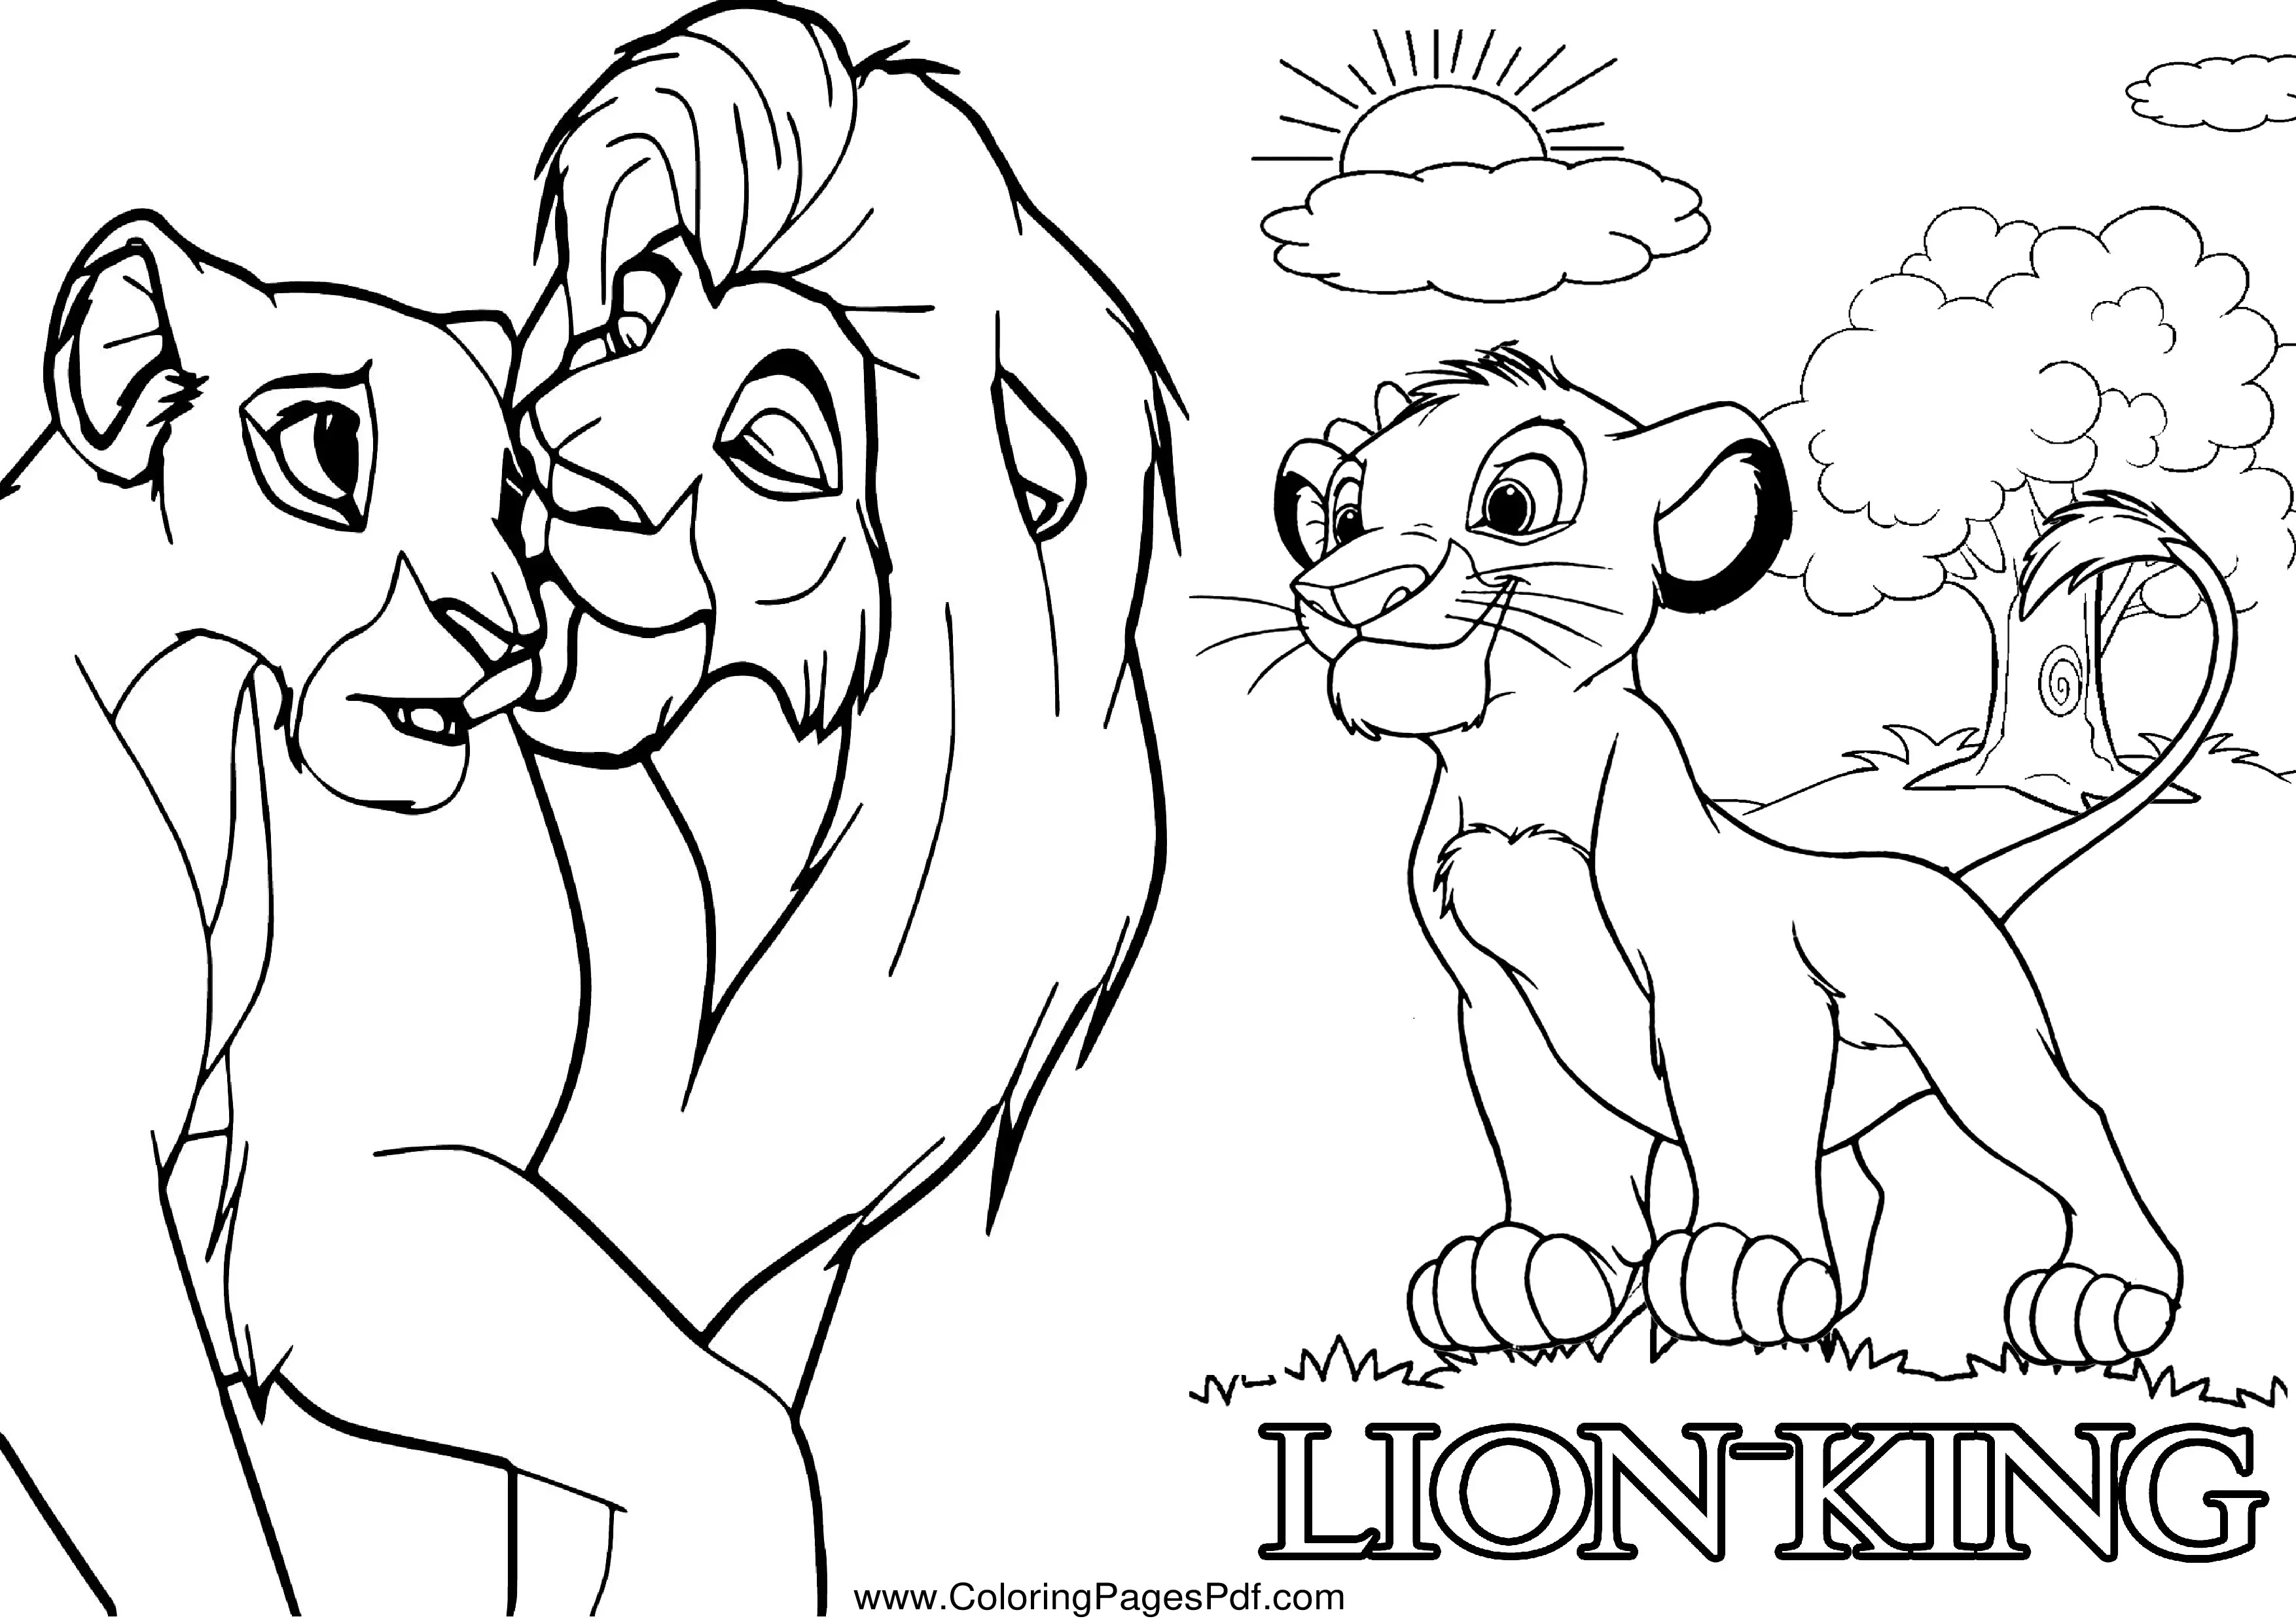 Free Lion king coloring pages